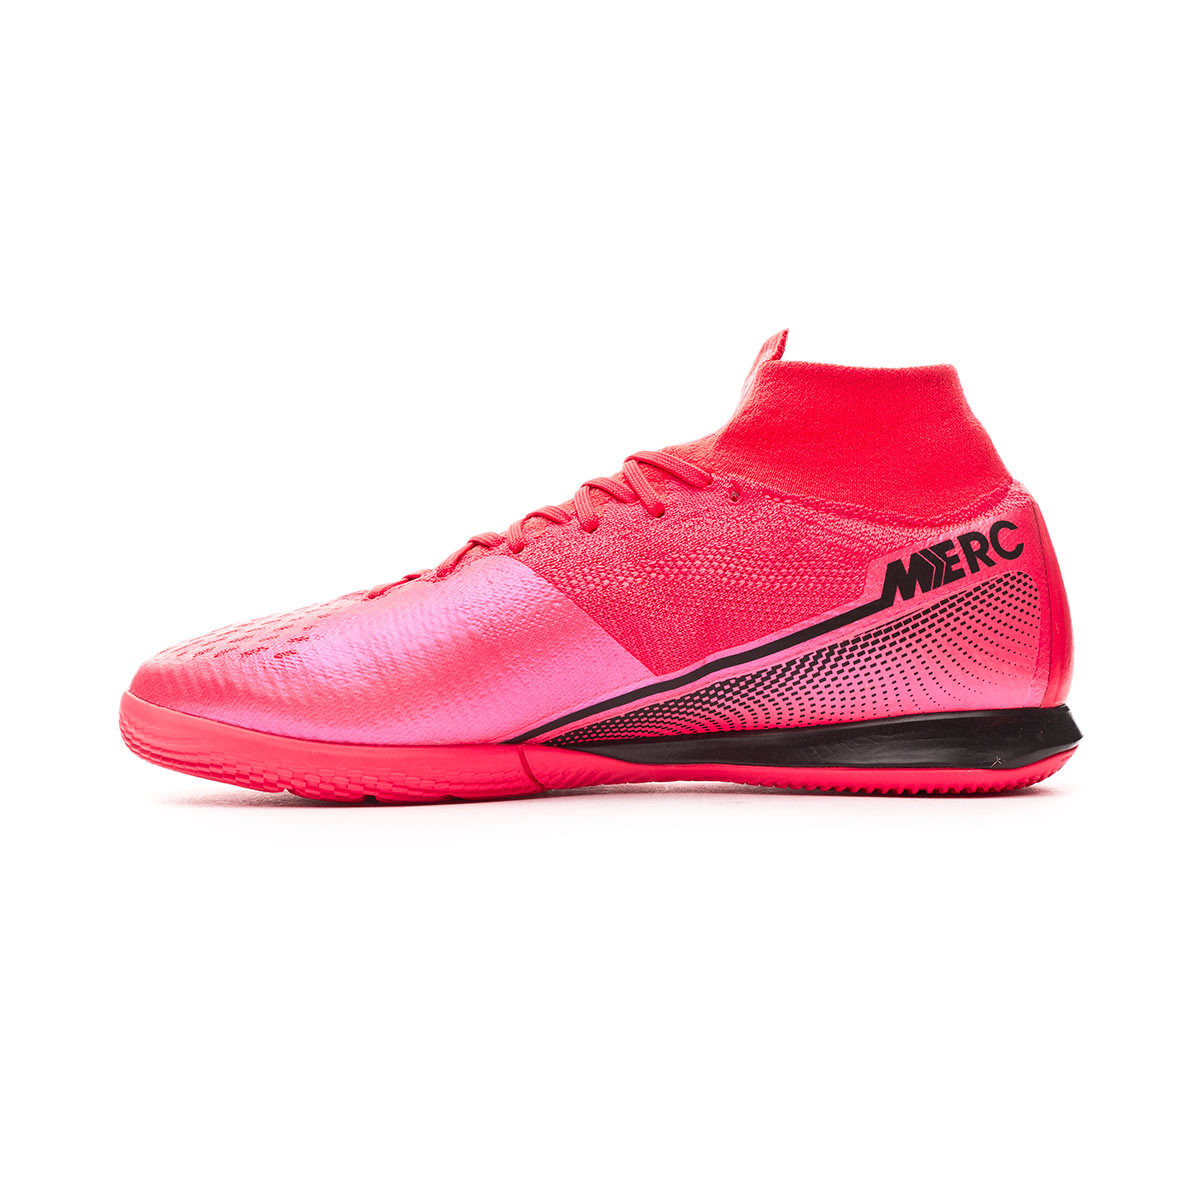 Nike Mercurial Superfly 7 Youth Elite FG Cleats Future Lab 2.